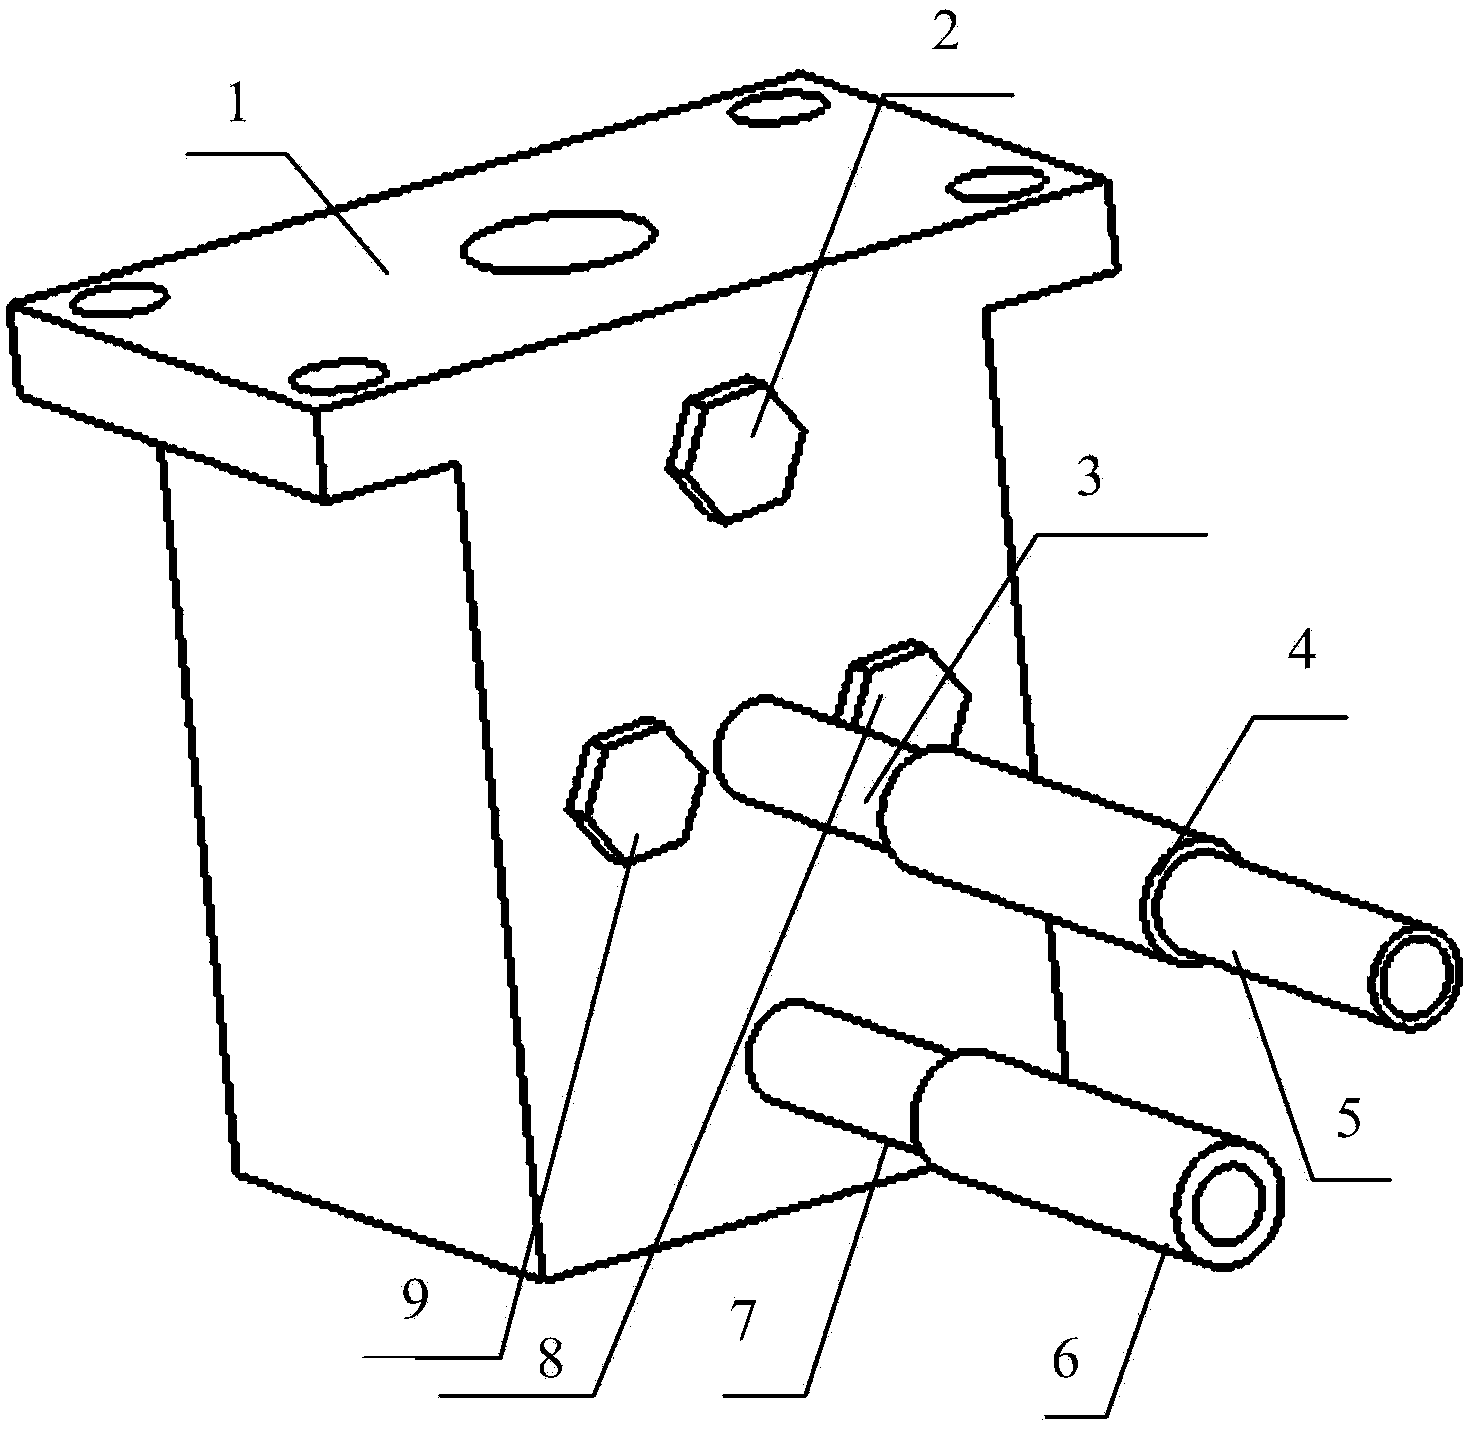 Device with changeable gas injection direction and nozzle number